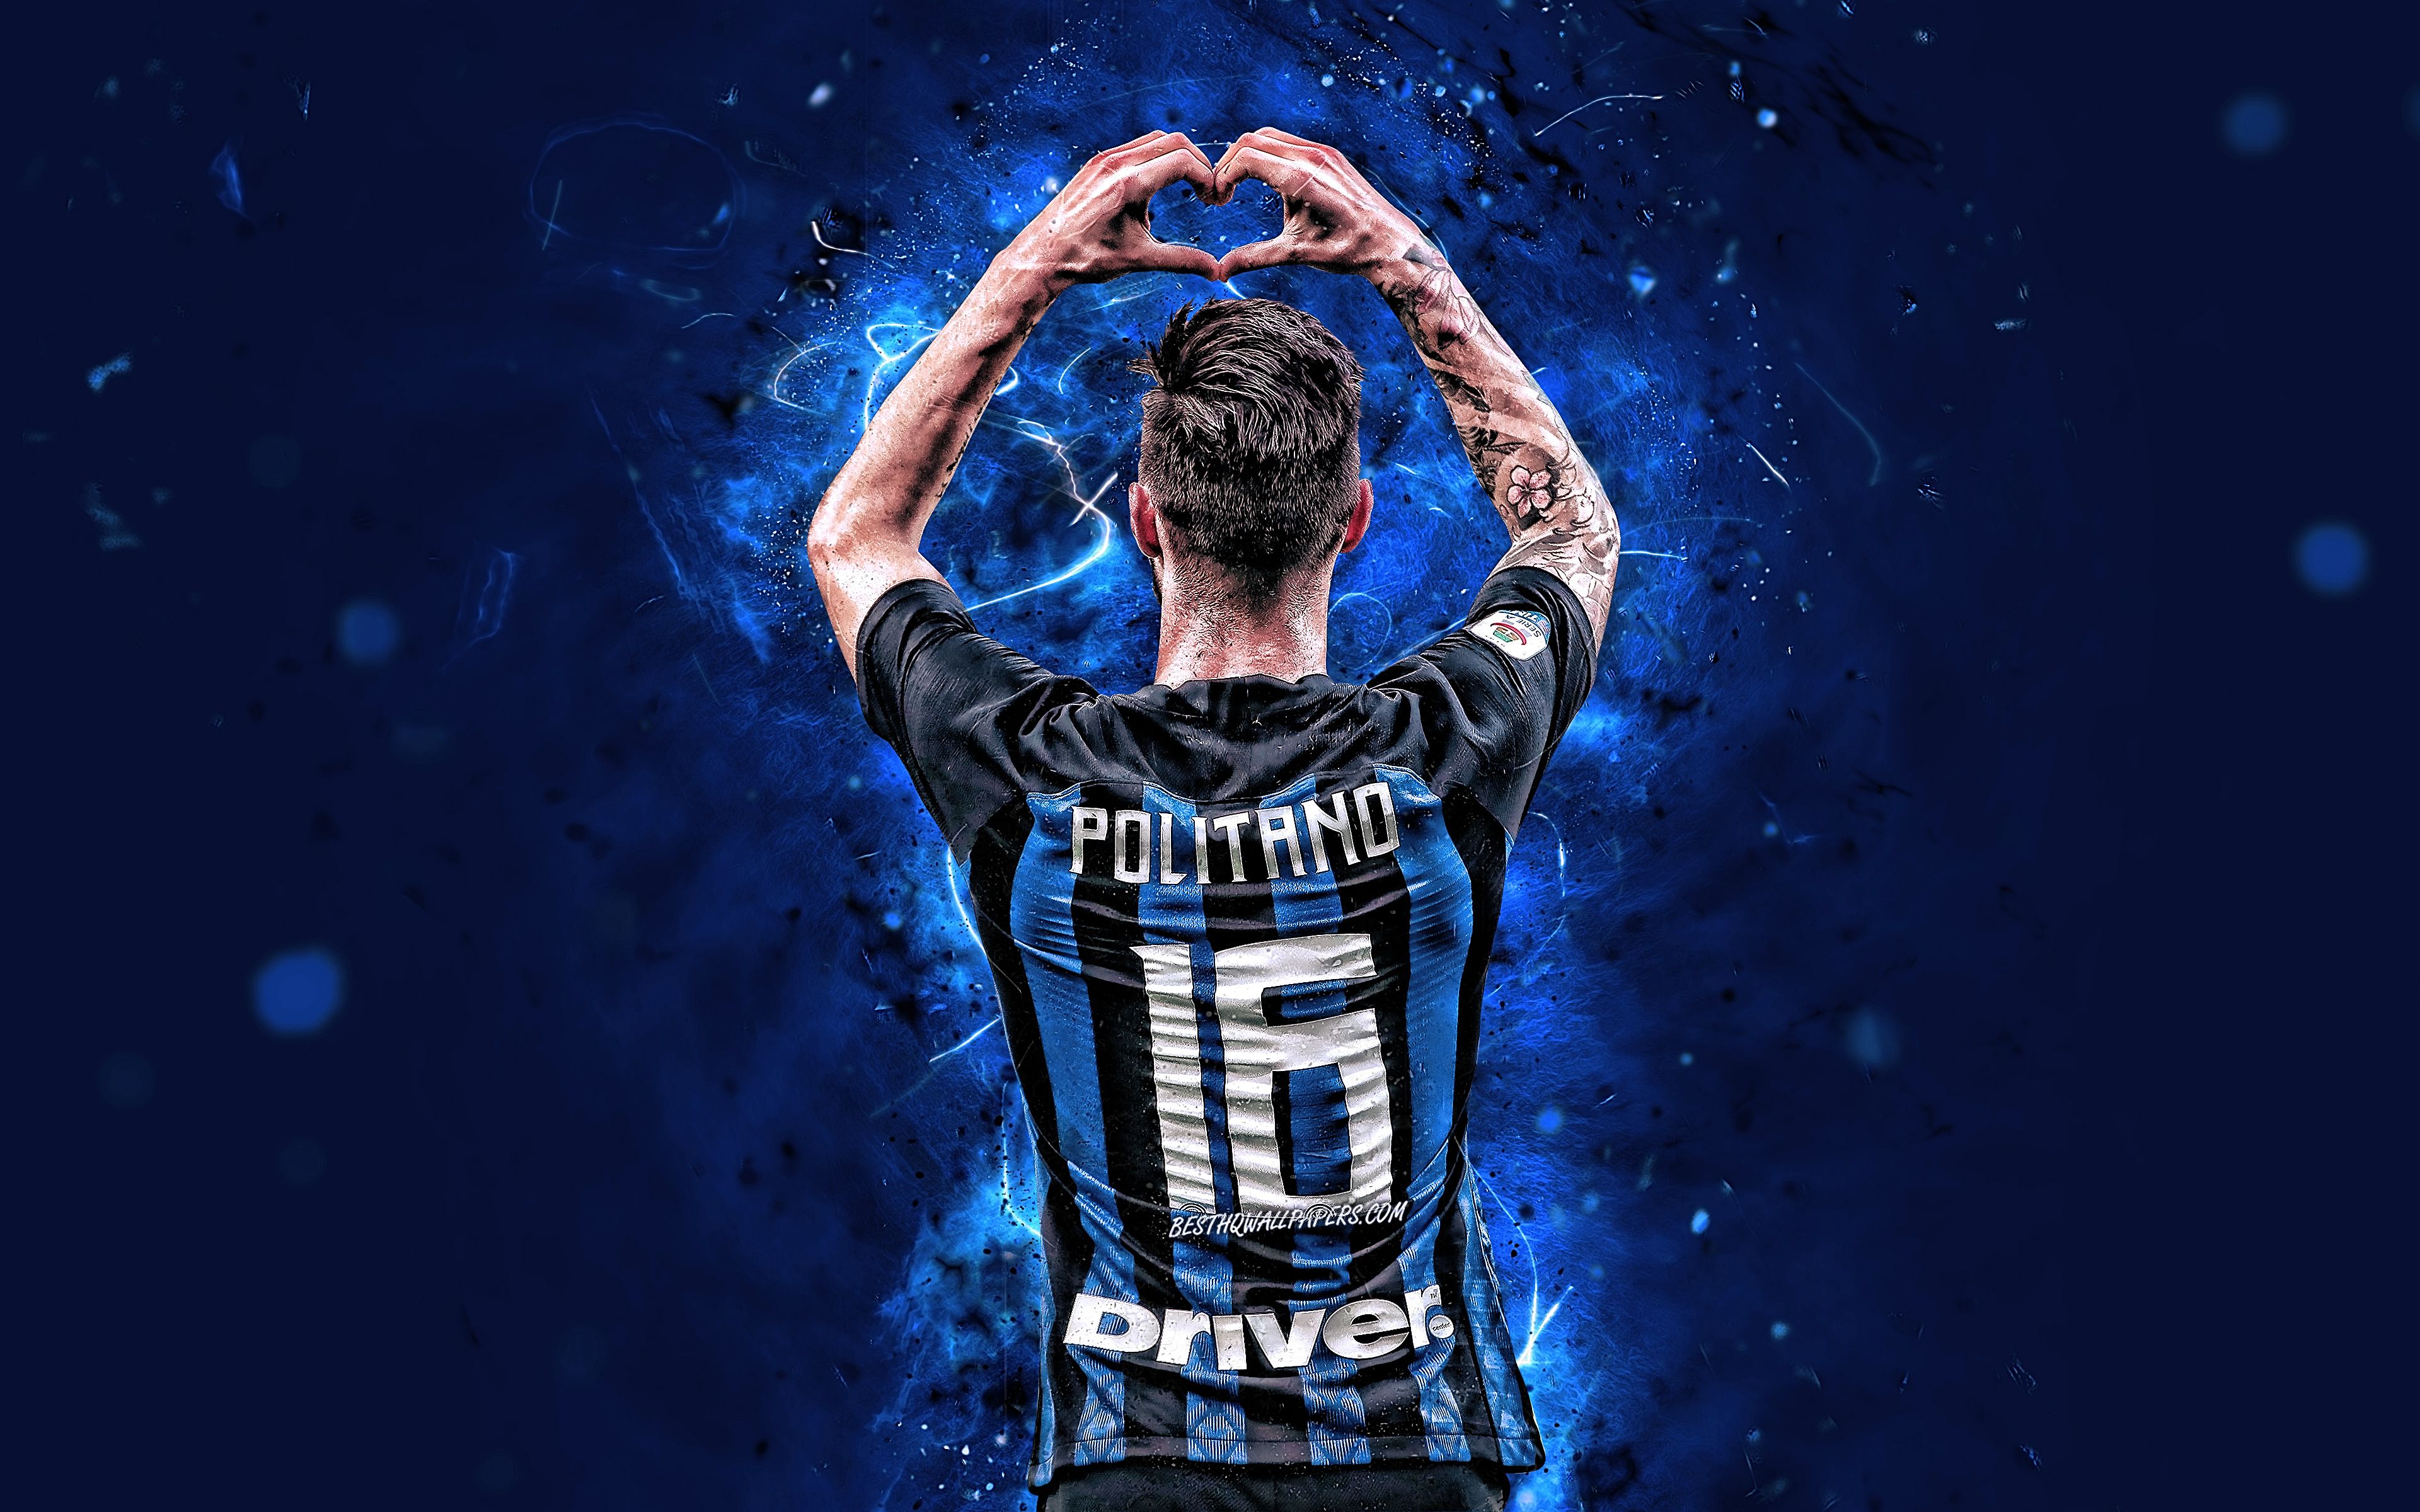 Download wallpaper 4k, Matteo Politano, back view, Internazionale, italian footballers, Italy, goal, Serie A, Politano, Inter Milan FC, soccer, football, neon lights for desktop with resolution 3840x2400. High Quality HD picture wallpaper